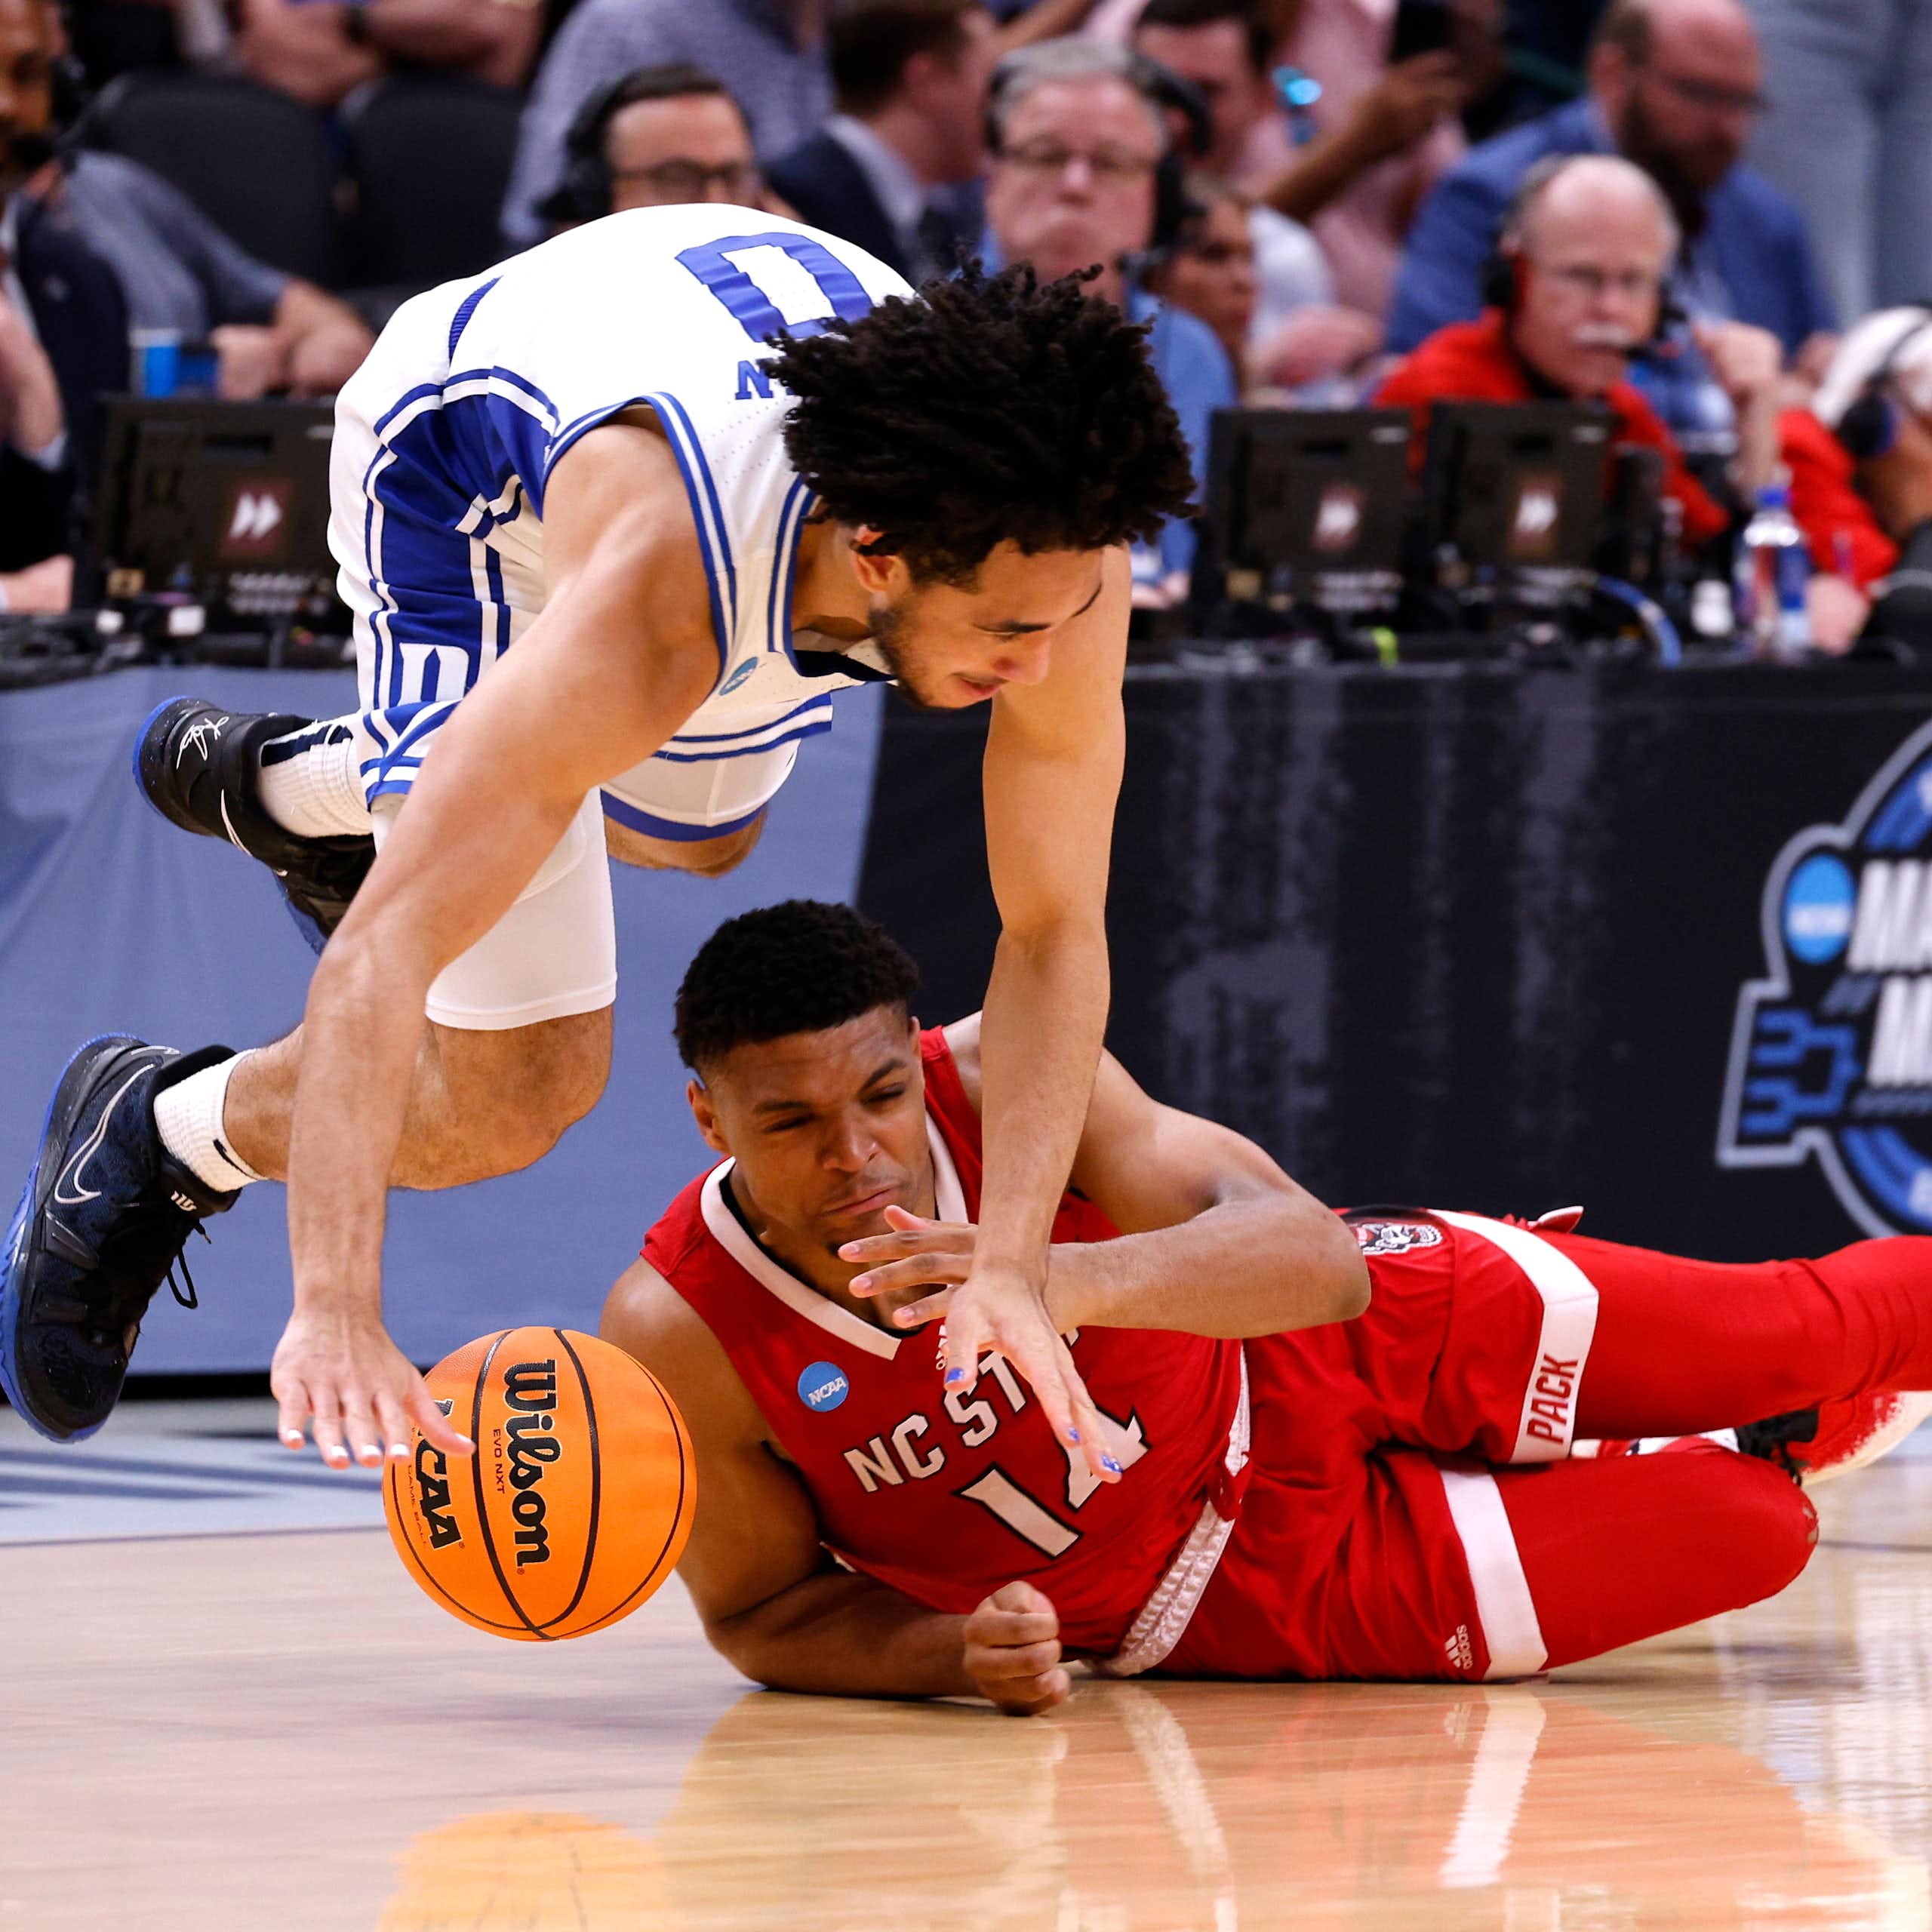 A basketball player in a white uniform with blue lettering is midair as he scrambles for a basketball with a player from the opposing team, who is wearing red, is lying on the court underneath.